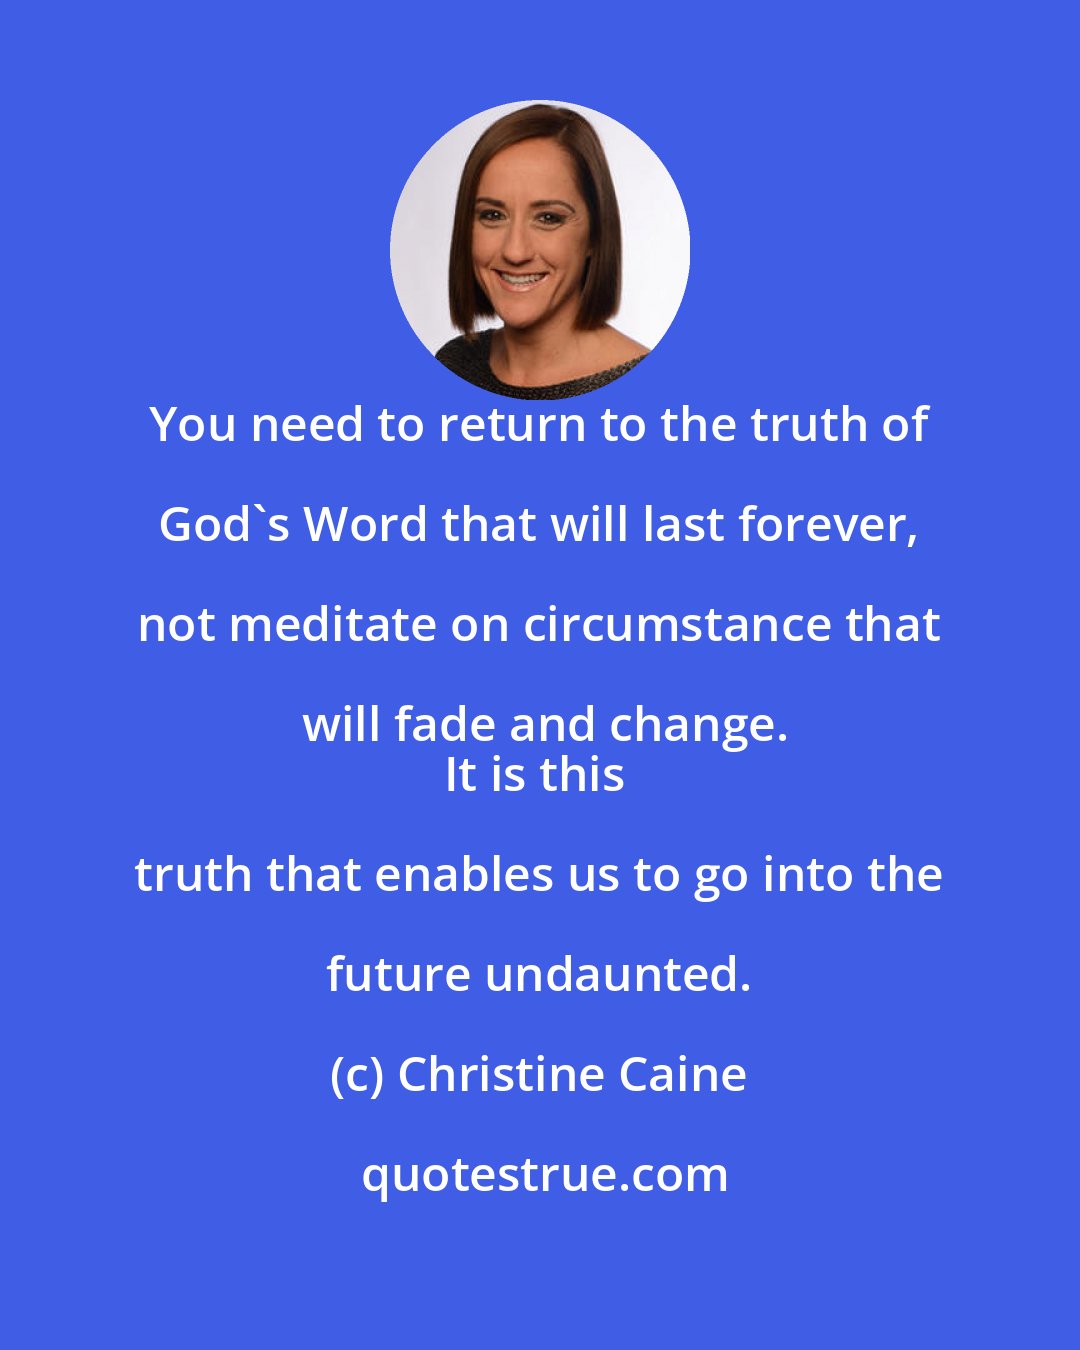 Christine Caine: You need to return to the truth of God's Word that will last forever, not meditate on circumstance that will fade and change.
It is this truth that enables us to go into the future undaunted.